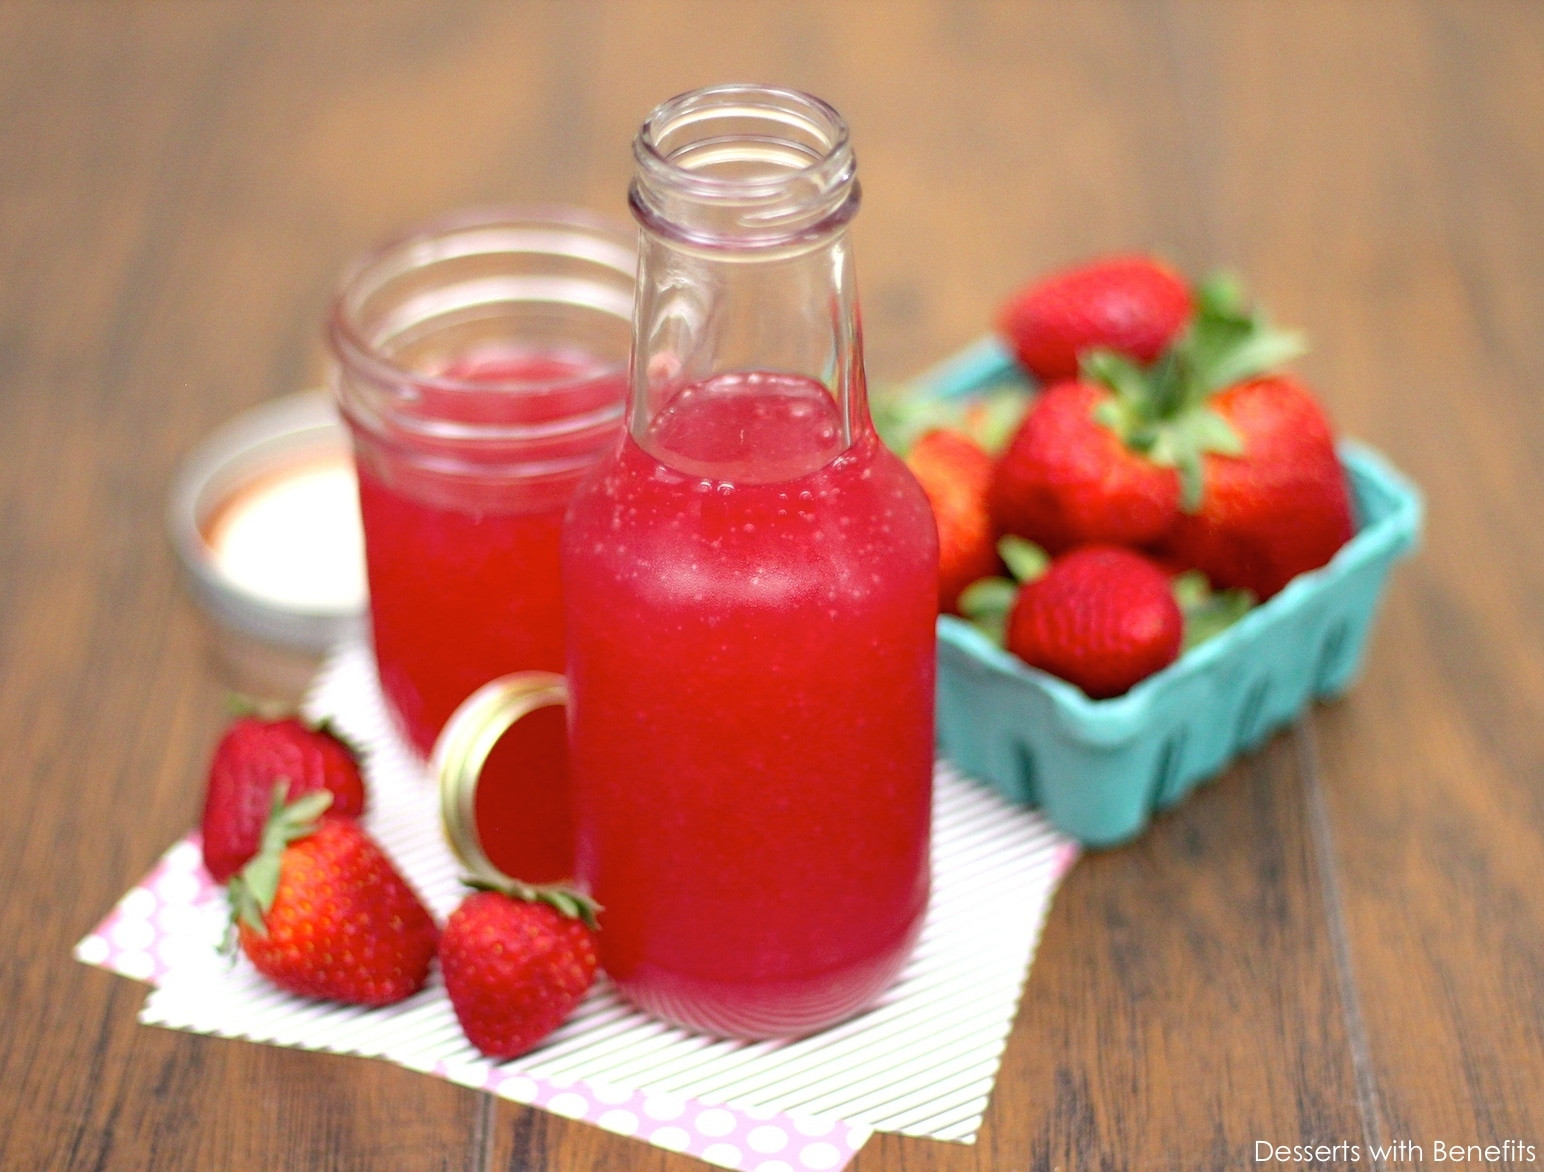 Healthy Homemade Desserts
 Healthy Sugar Free Strawberry Syrup Desserts with Benefits